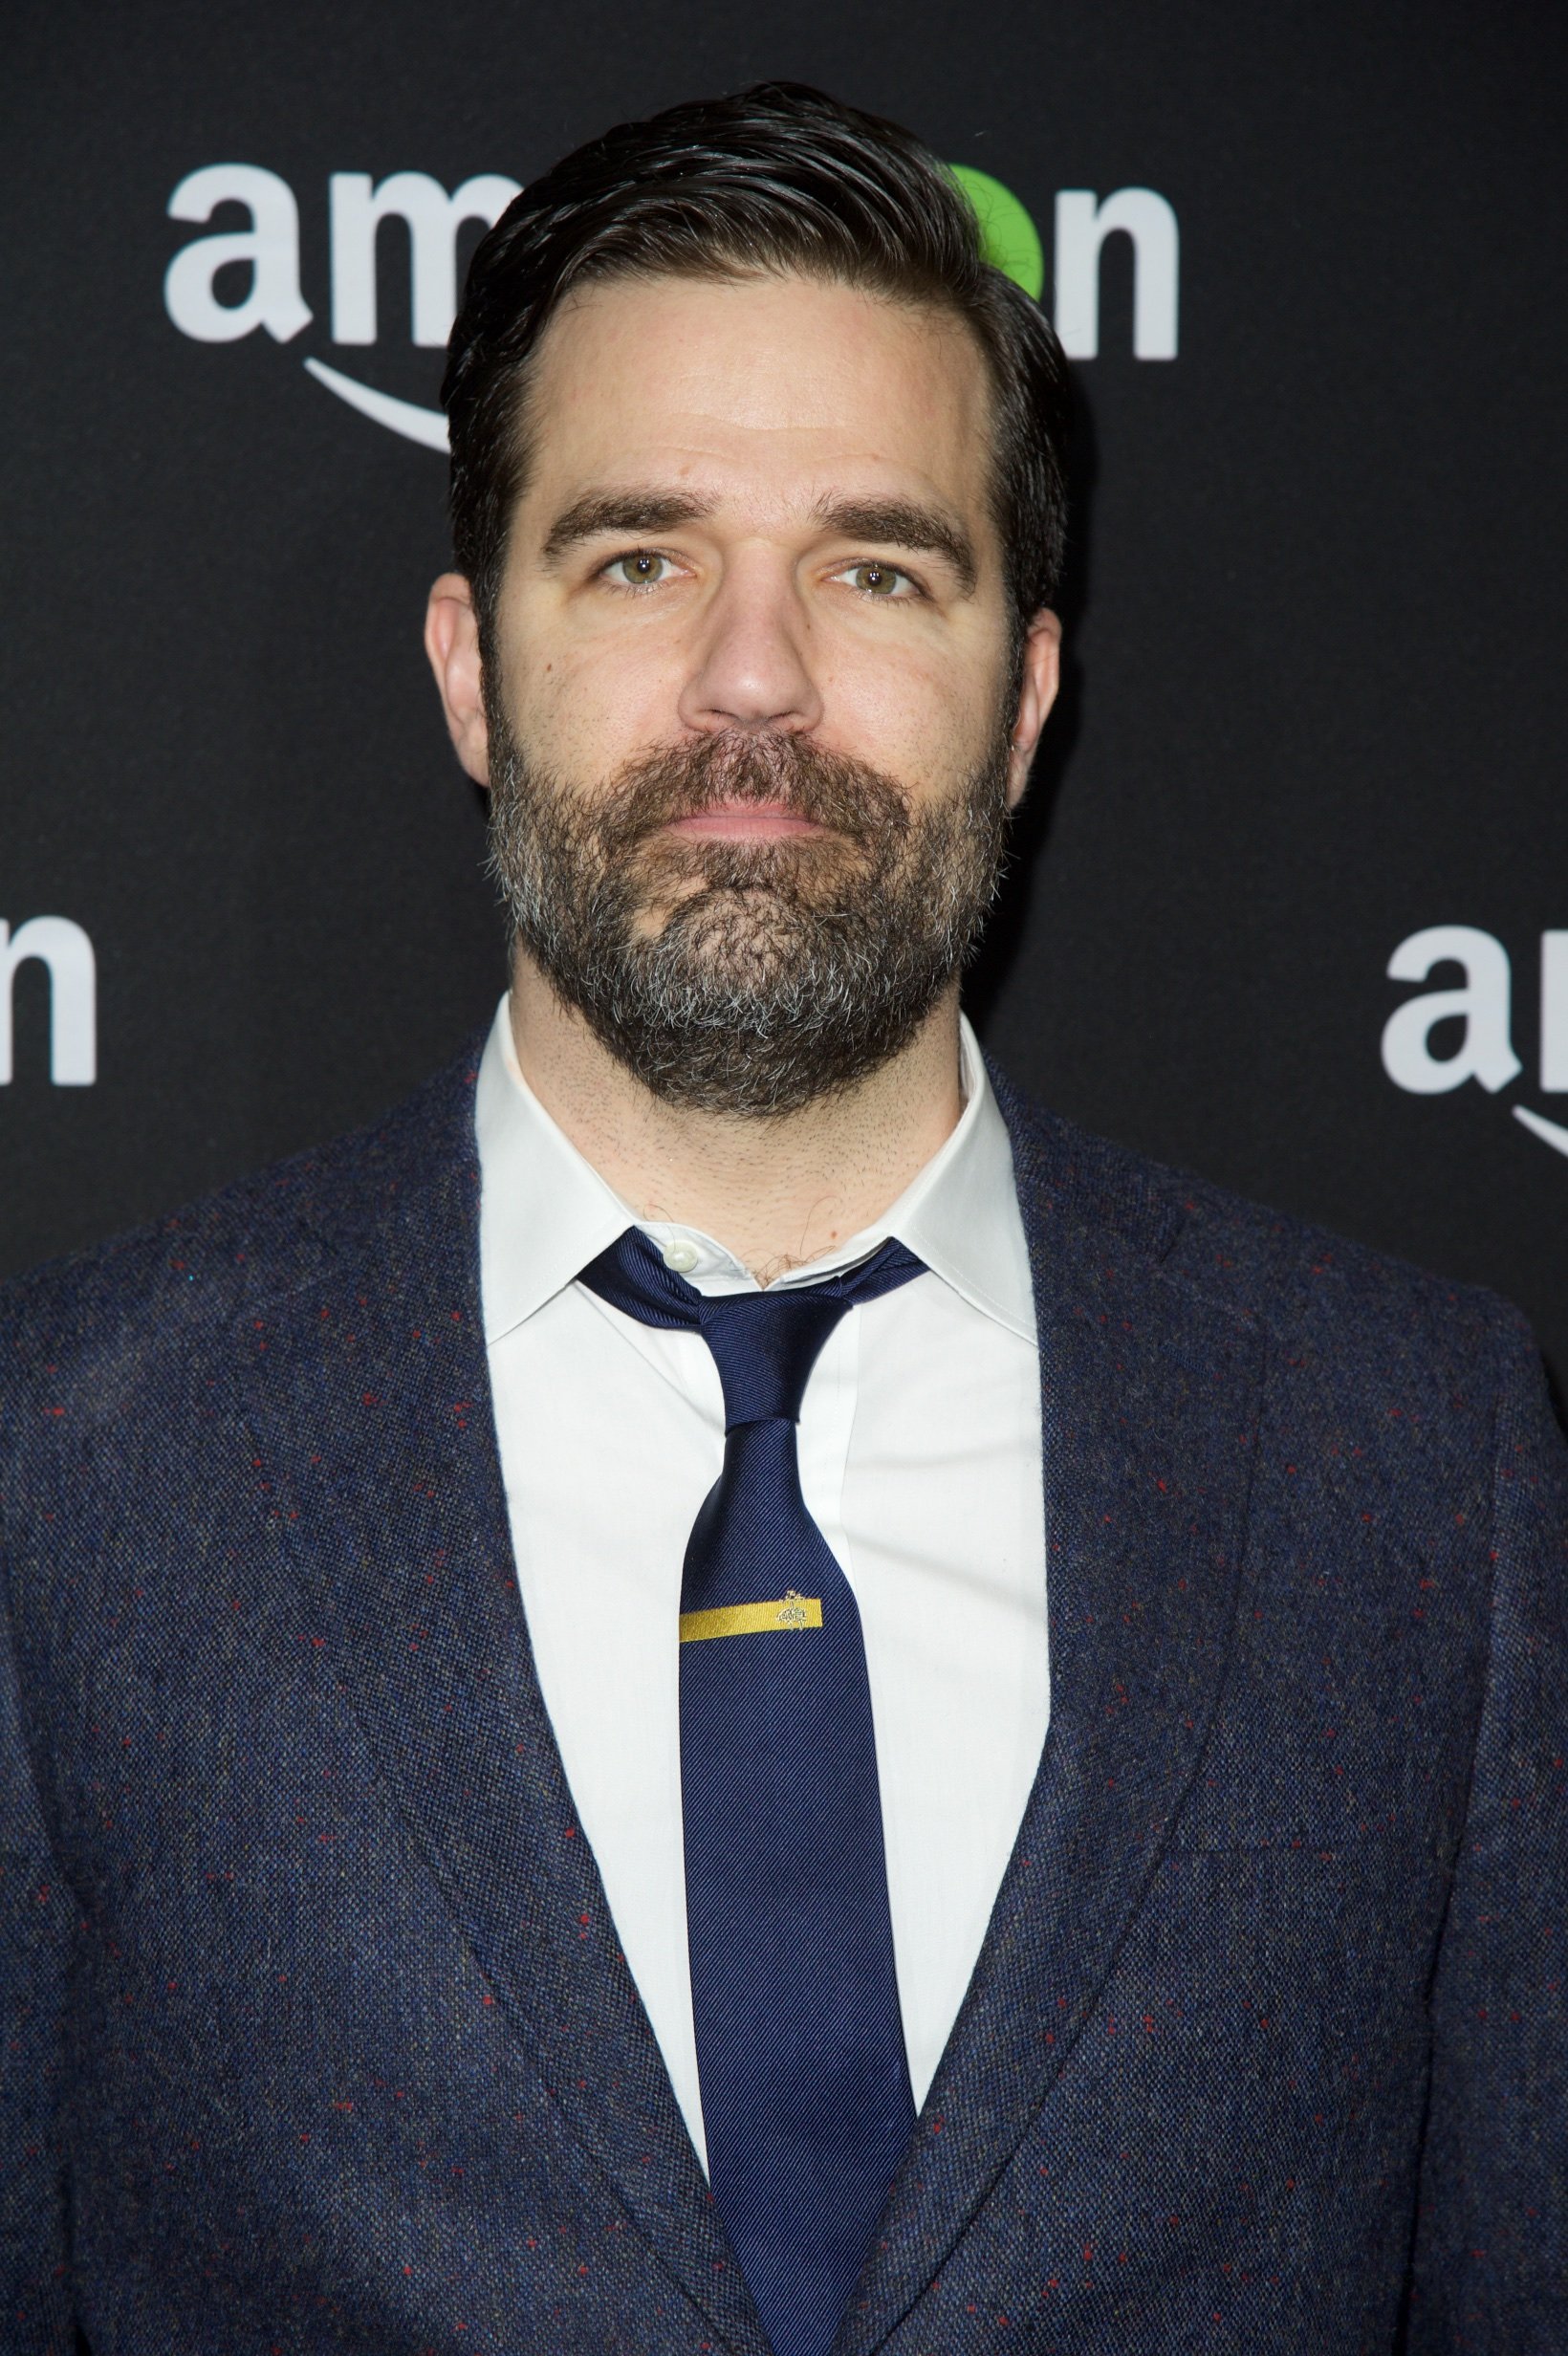 Rob Delaney at the Amazon Studios Golden Globes Party | Photo: Getty Images